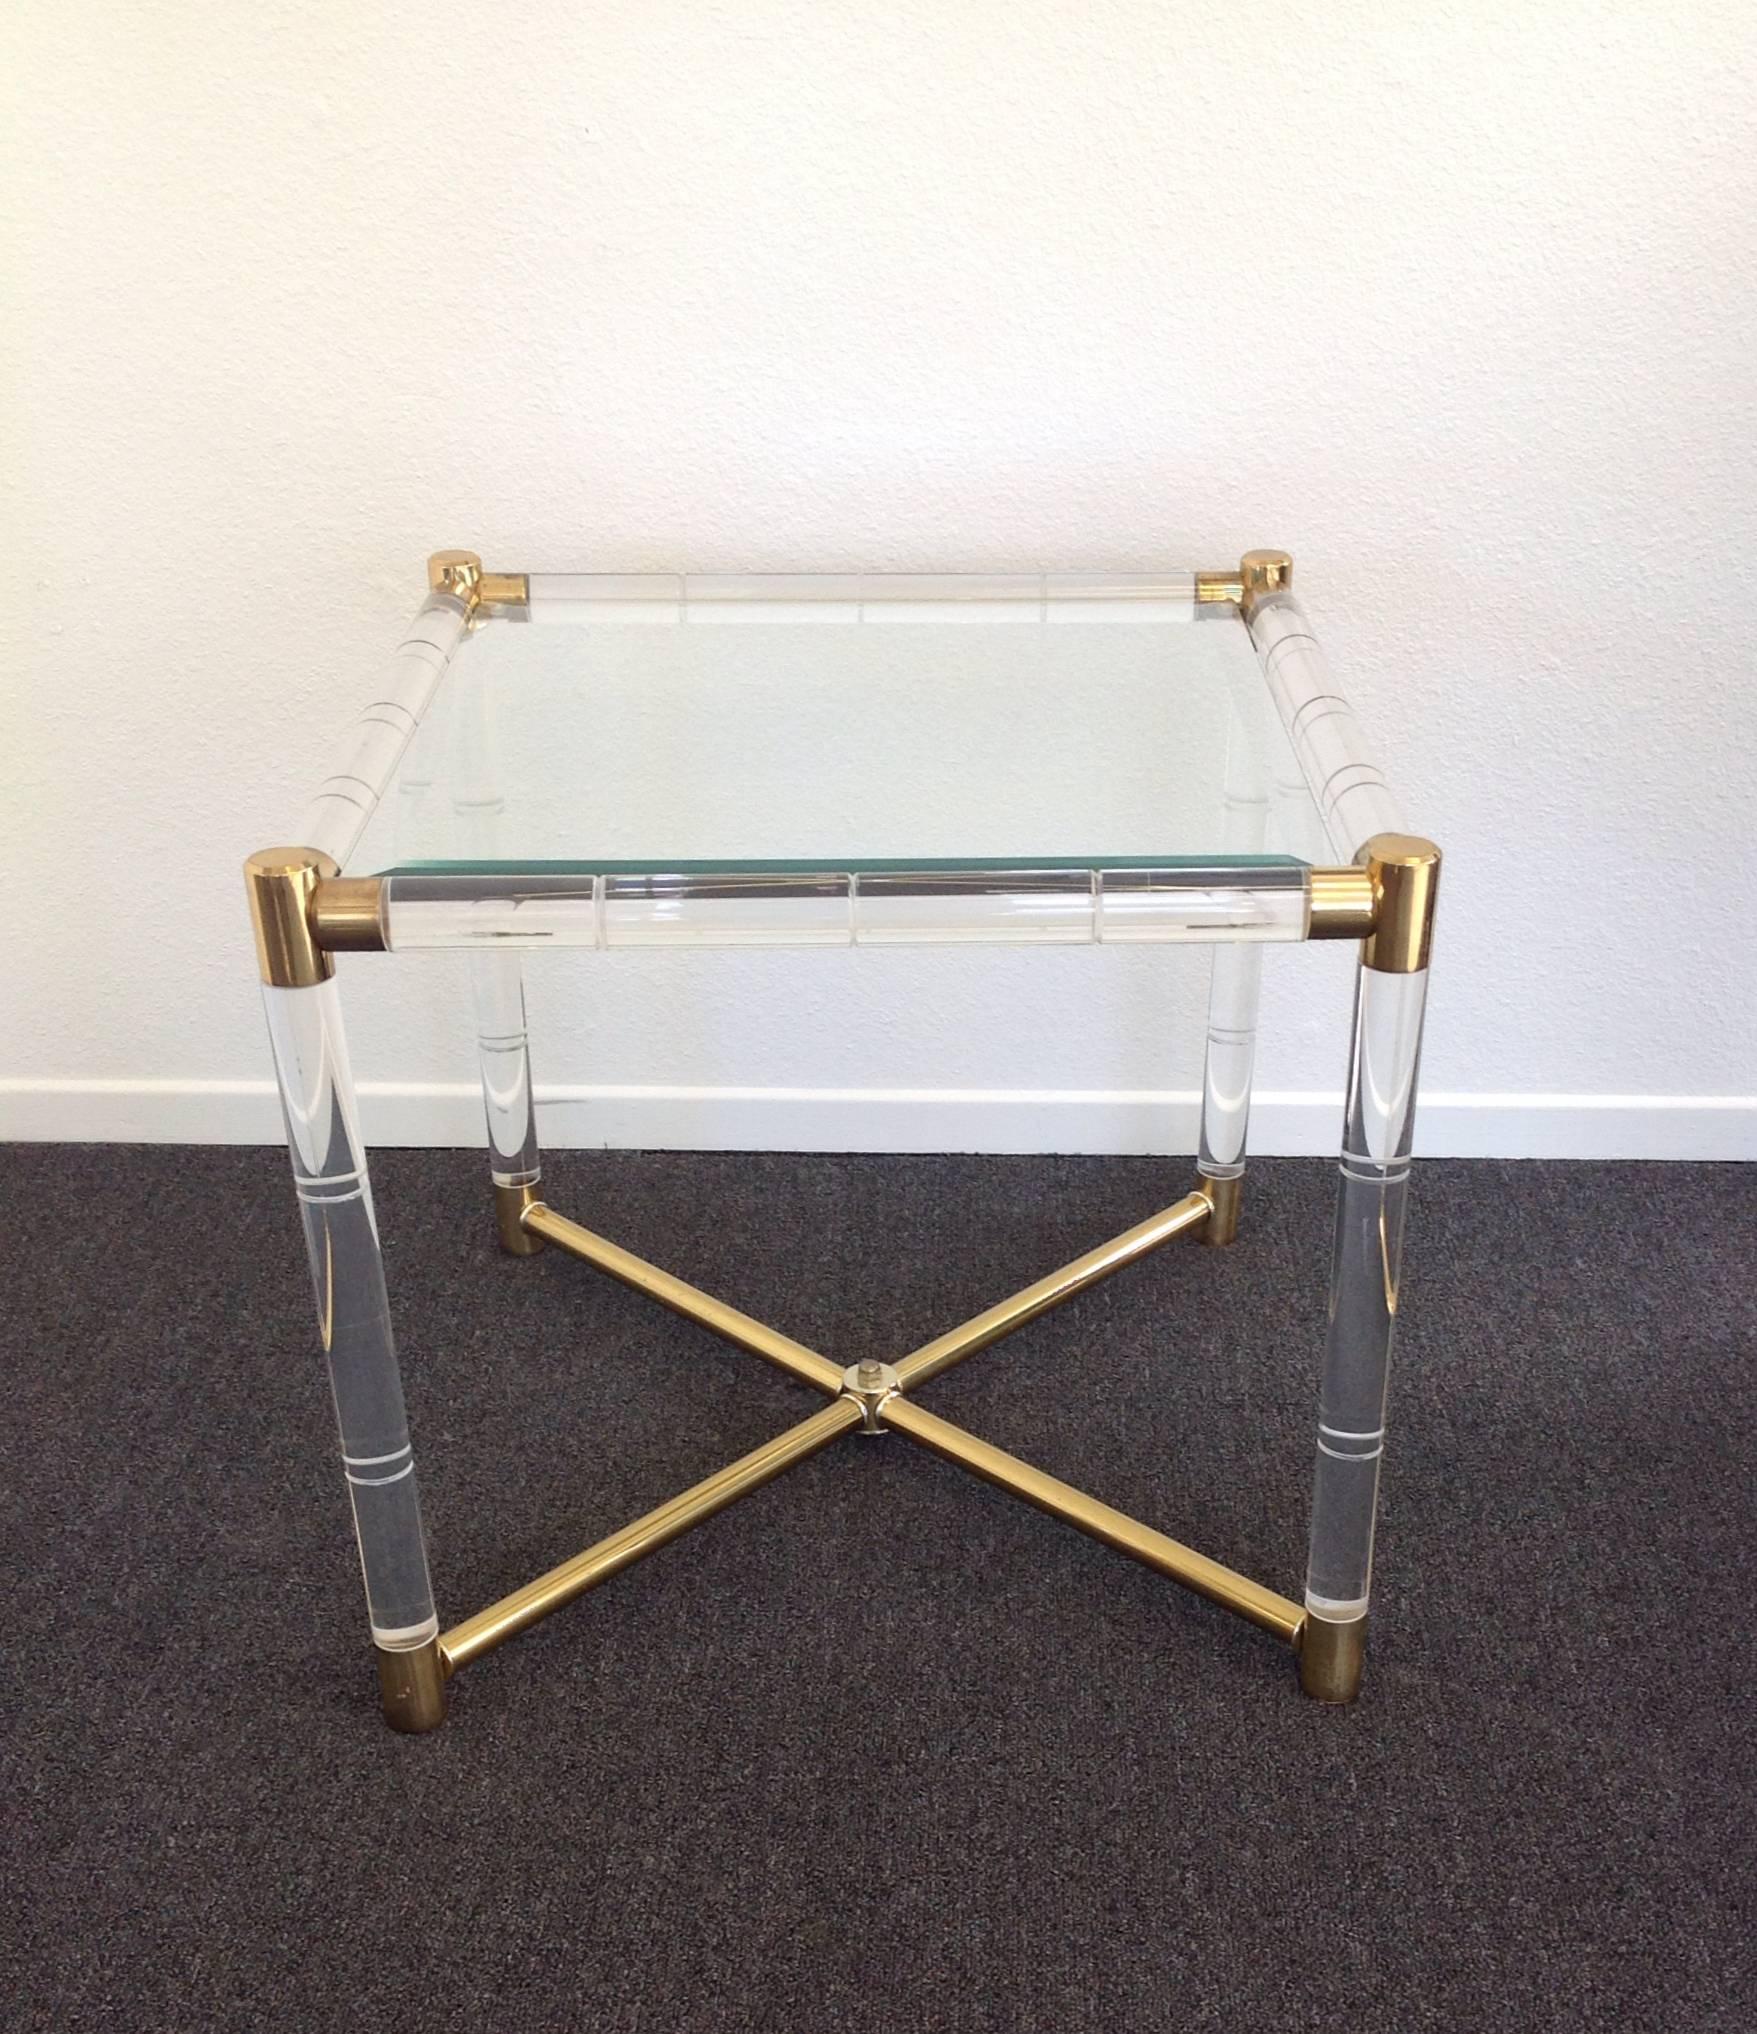 A glamorous acrylic and brass with a bevelled glass top side table design by Charles Hollis Jones in 1960s from his 